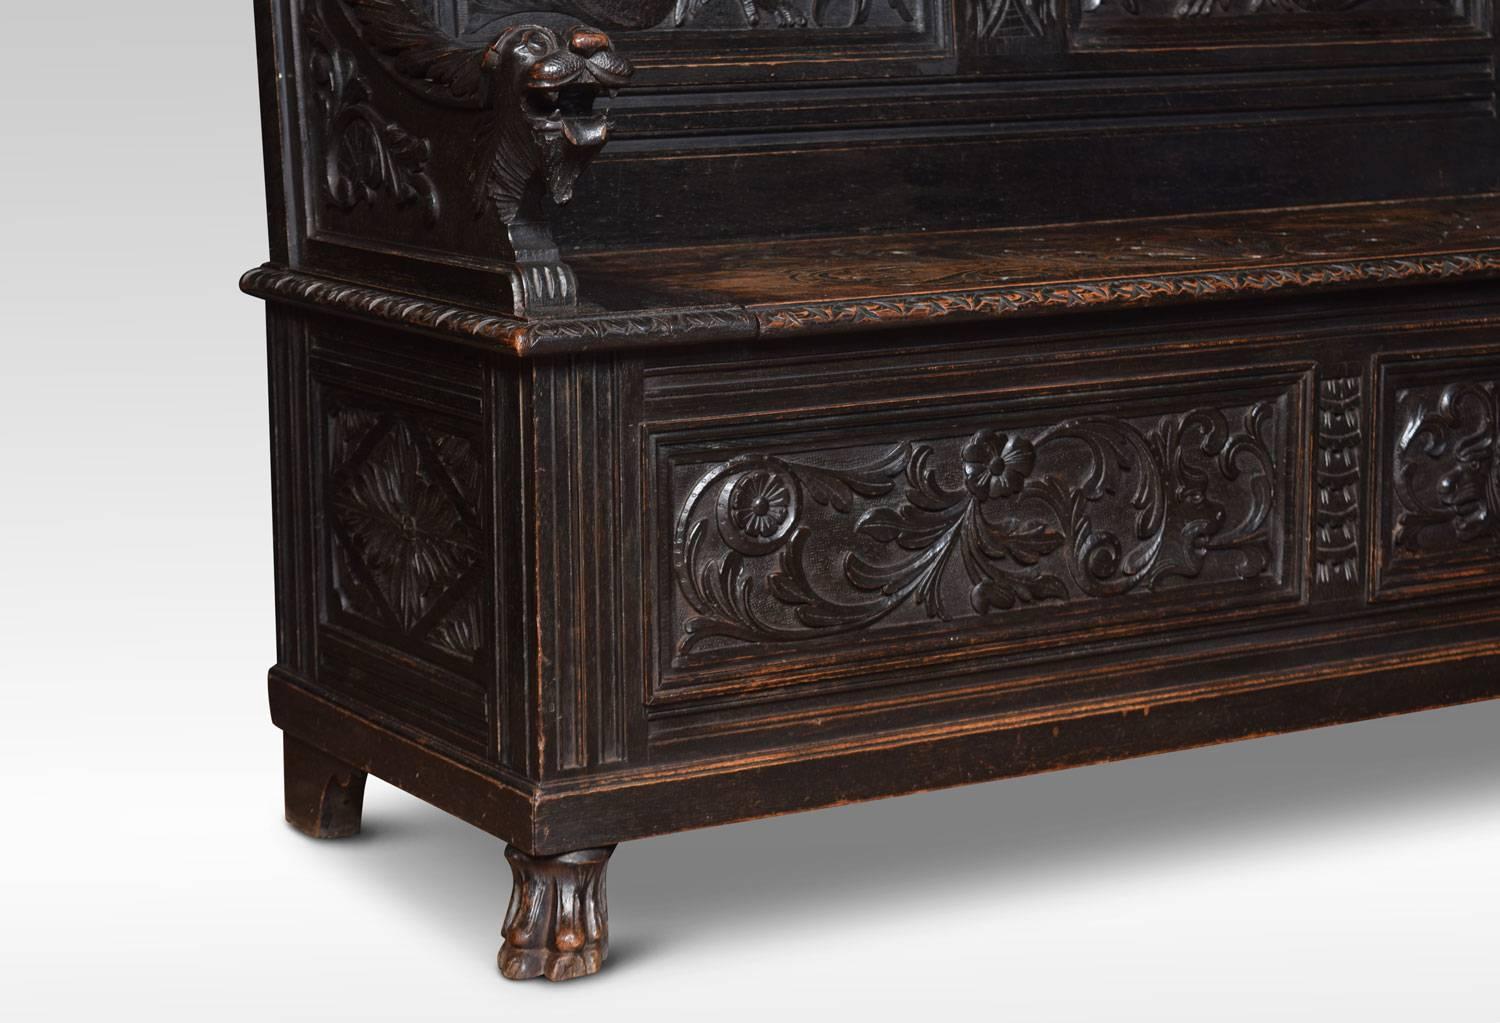 19th century carved oak hall settle, with panelled back depicting Merlion and scrolling relief. Above lift up seat flanked by carved Merlion headed arm rests. To the panelled base with floral motifs. All raised up on claw feet.
Dimensions:
Height